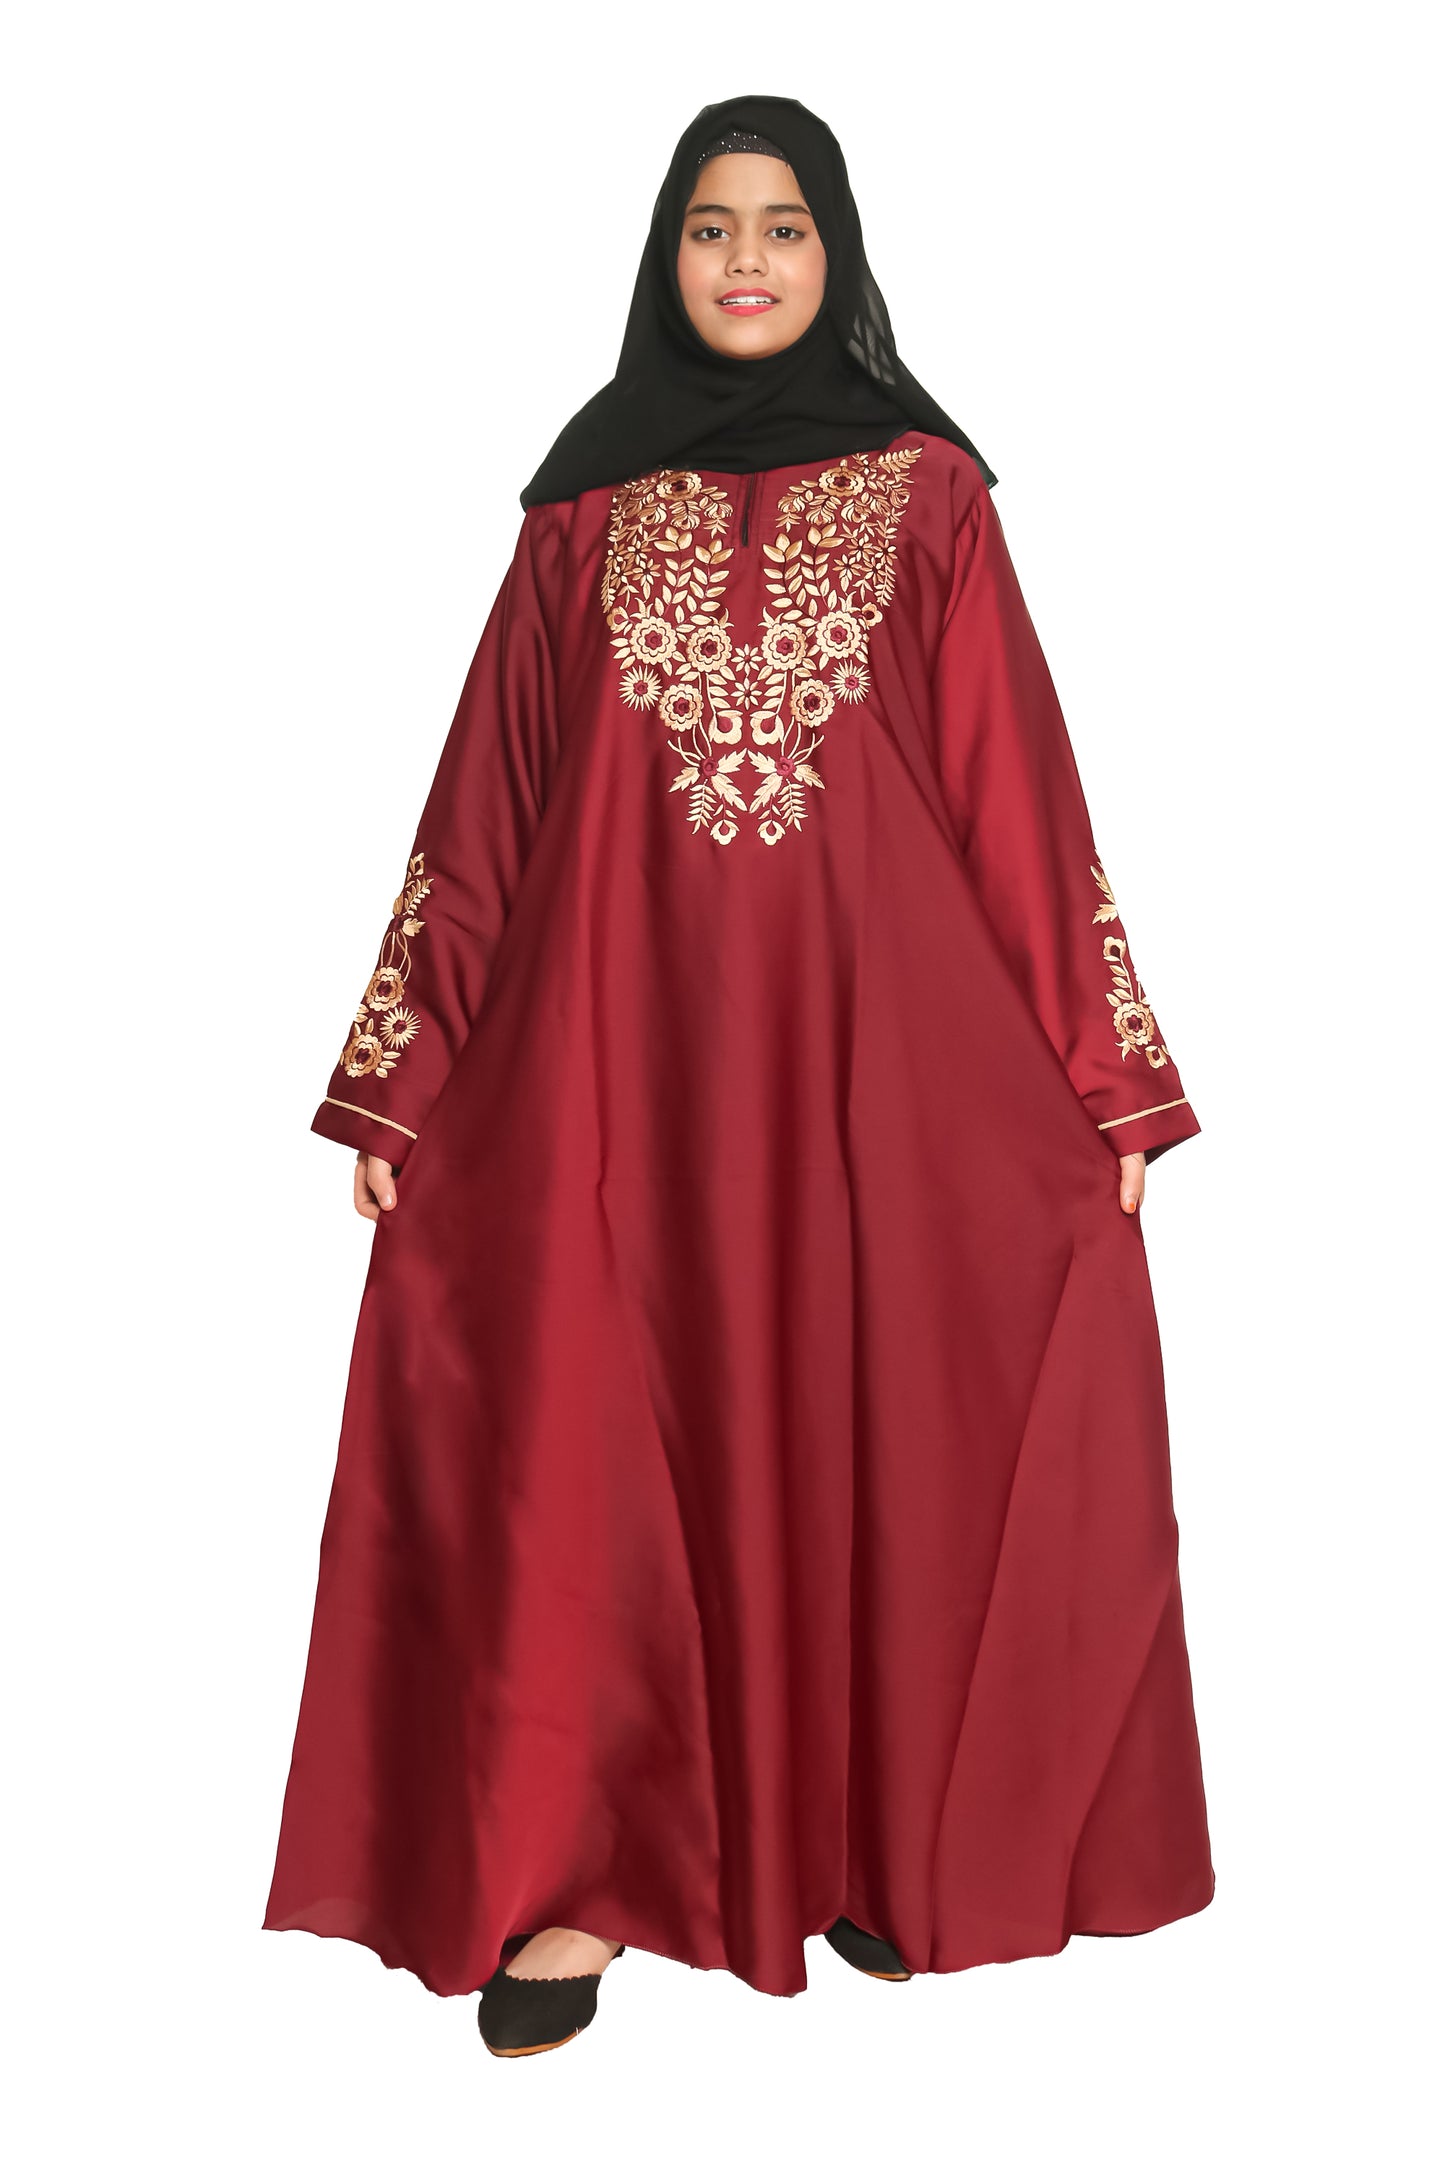 Modest City Self Design Maroon Gala Embroidery Abaya or Burqa With Hijab for Women & Girls-Series Laiba